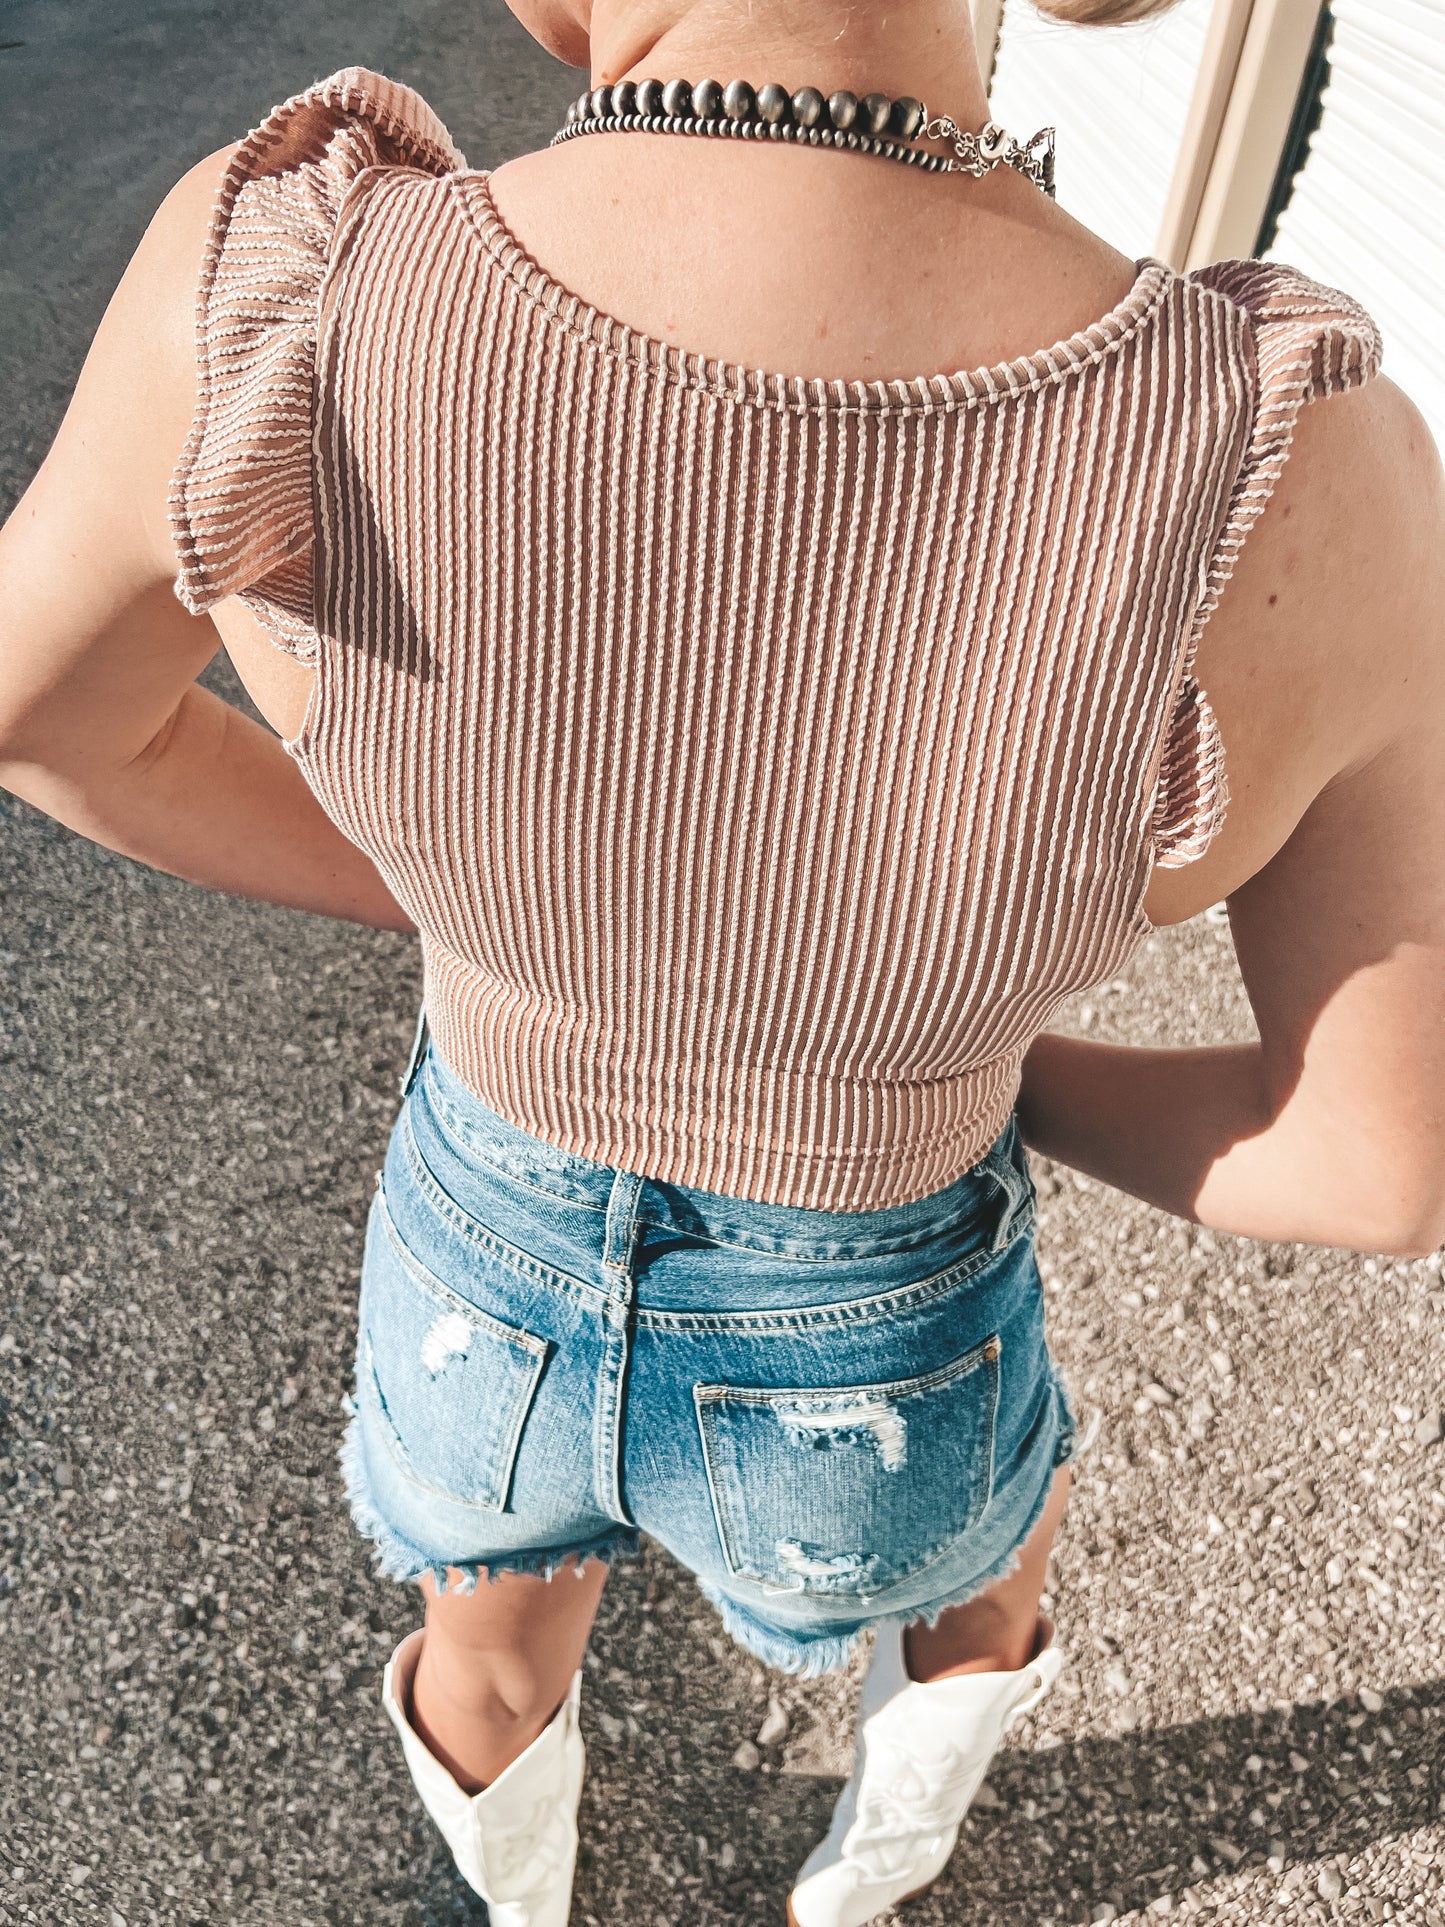 All about the Ruffles Body Suit